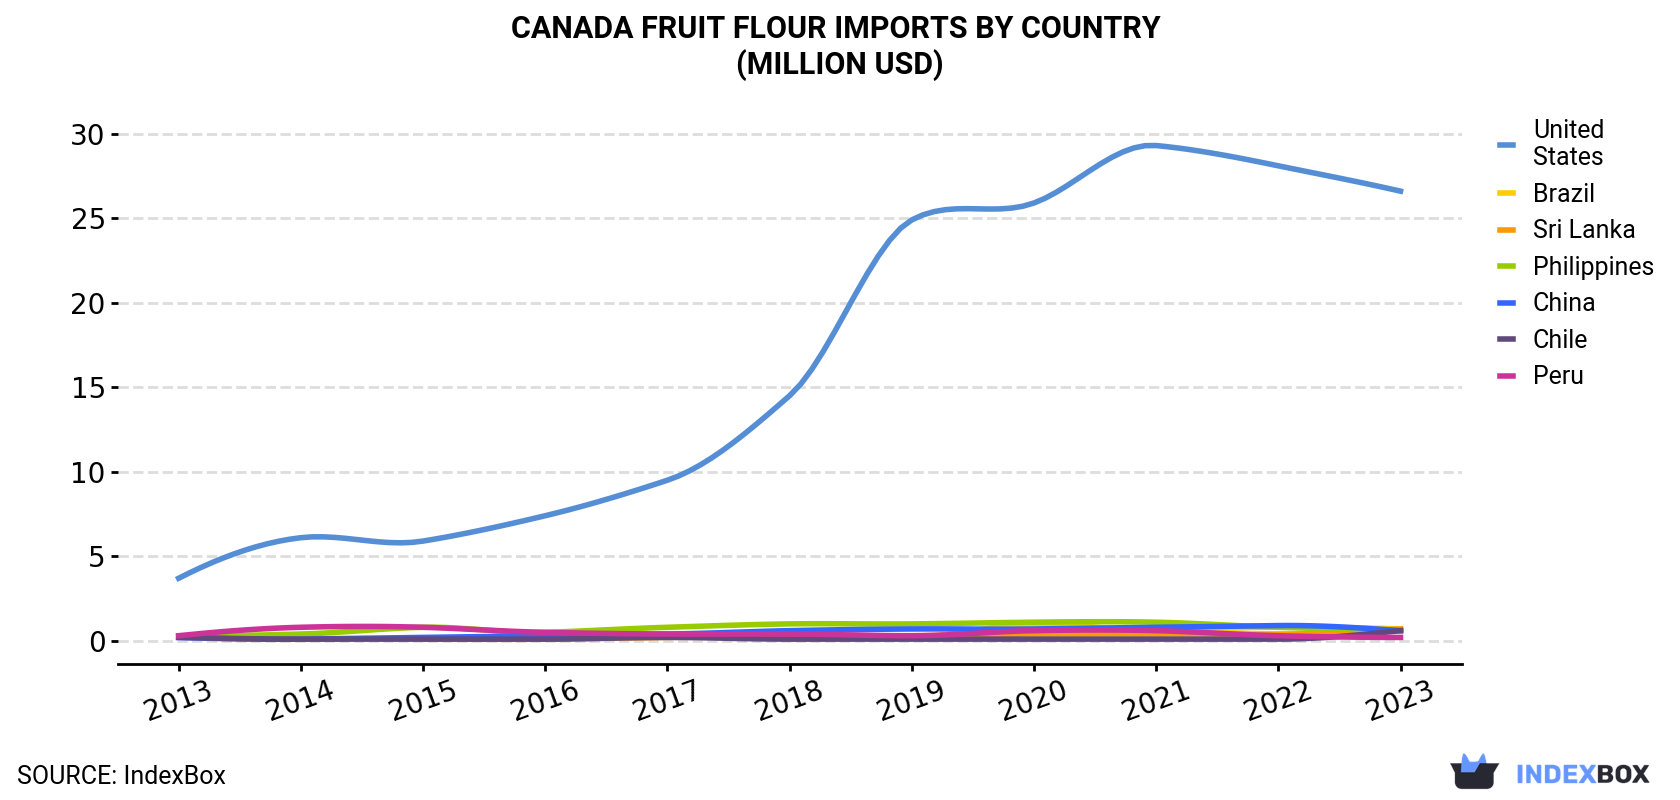 Canada Fruit Flour Imports By Country (Million USD)